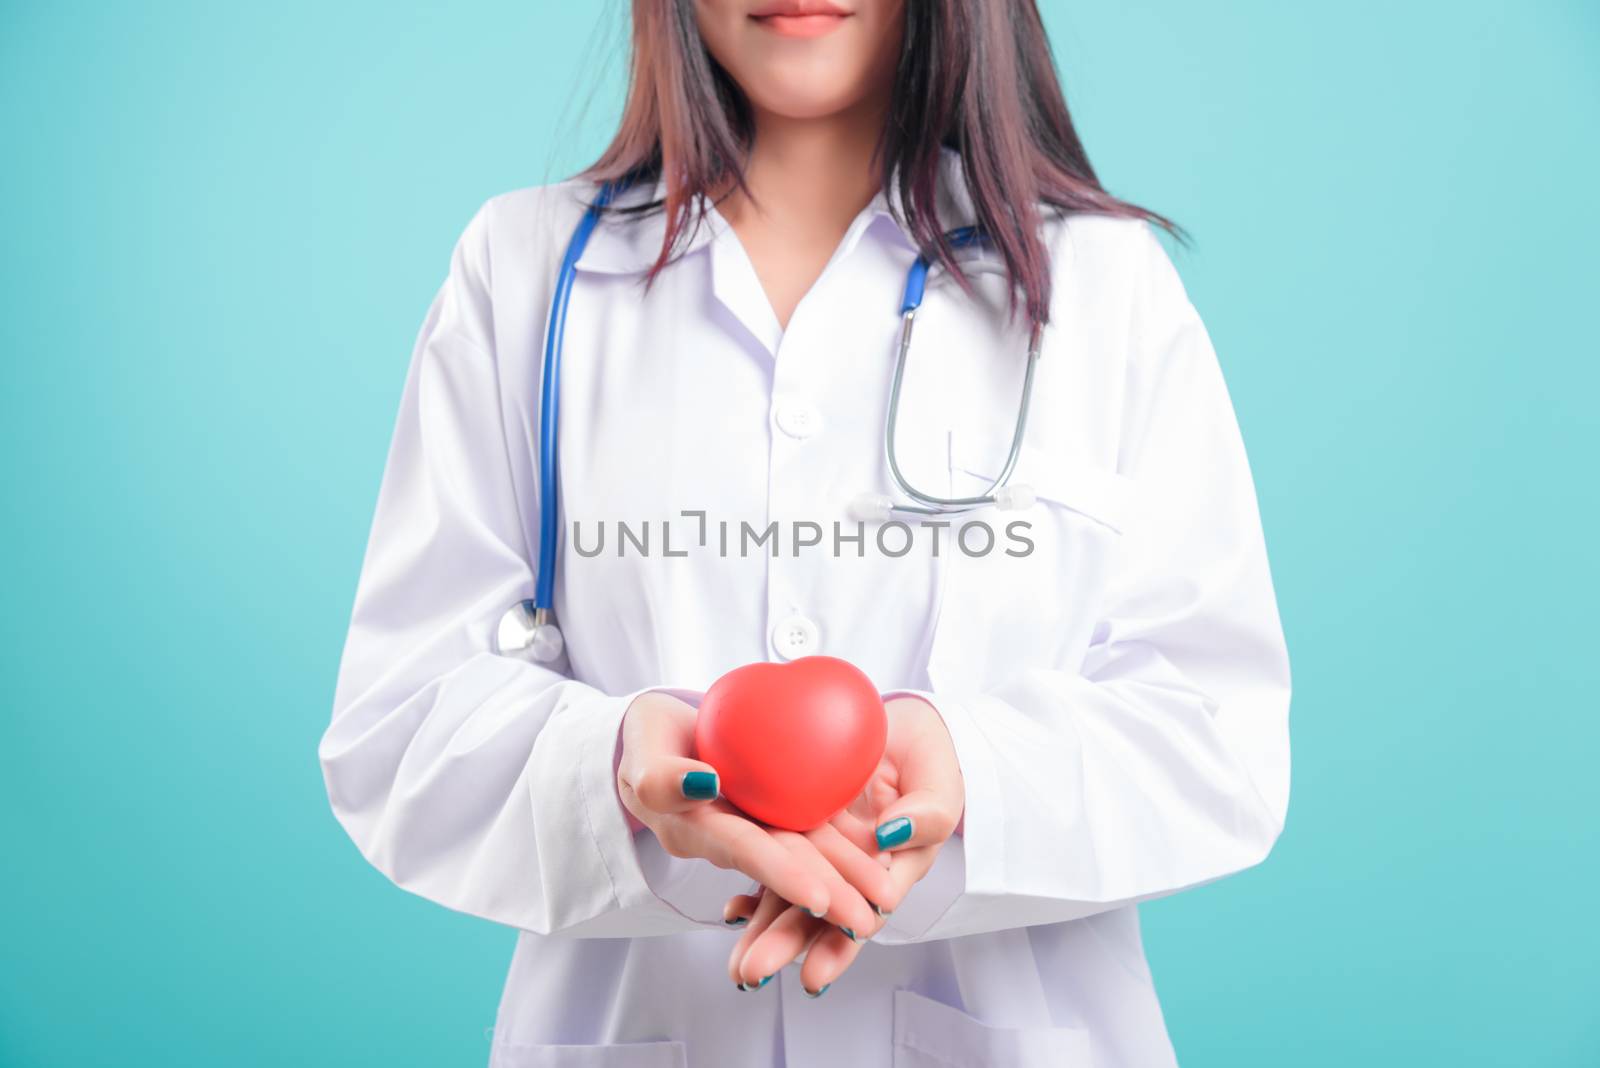 Asian doctor, beautiful young woman standing, smiling, holding a red head on hand on blue background with copy space for text Medical health care staff service concept